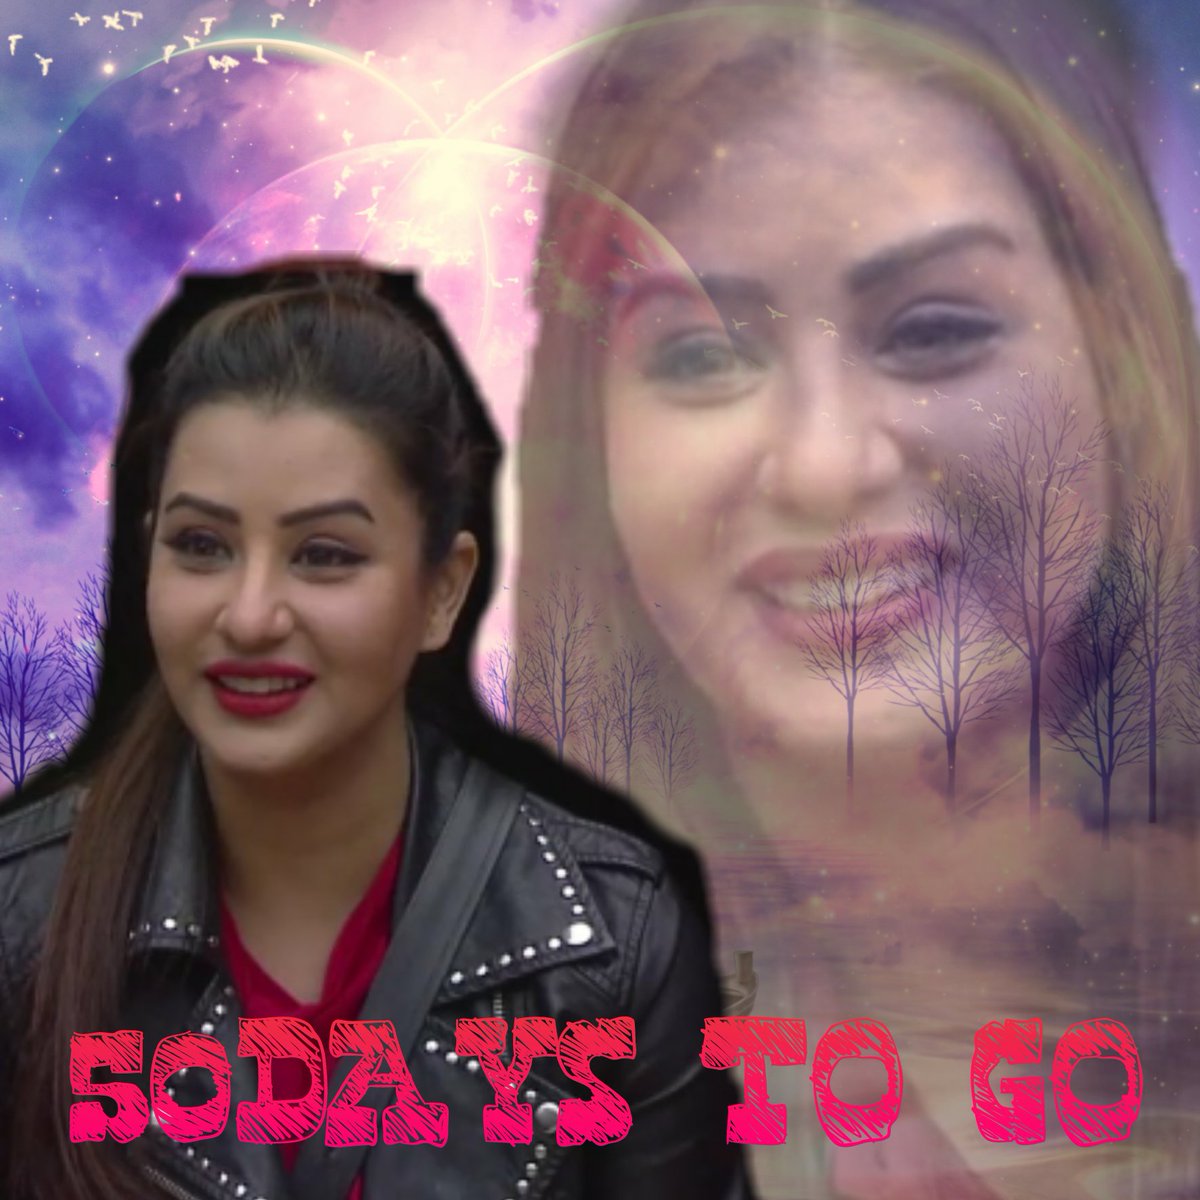 Most of the shadow of this life r cause by our standing in our own sunshine.
We don't grow when things are easy ,
We grow when we face challenges. 
@ShindeShilpaS 
#shilpashine 
#28thAugust 
#ShilpaSparklesIn50Days 
#WeLoveShilpaShinde 
#Shilpians